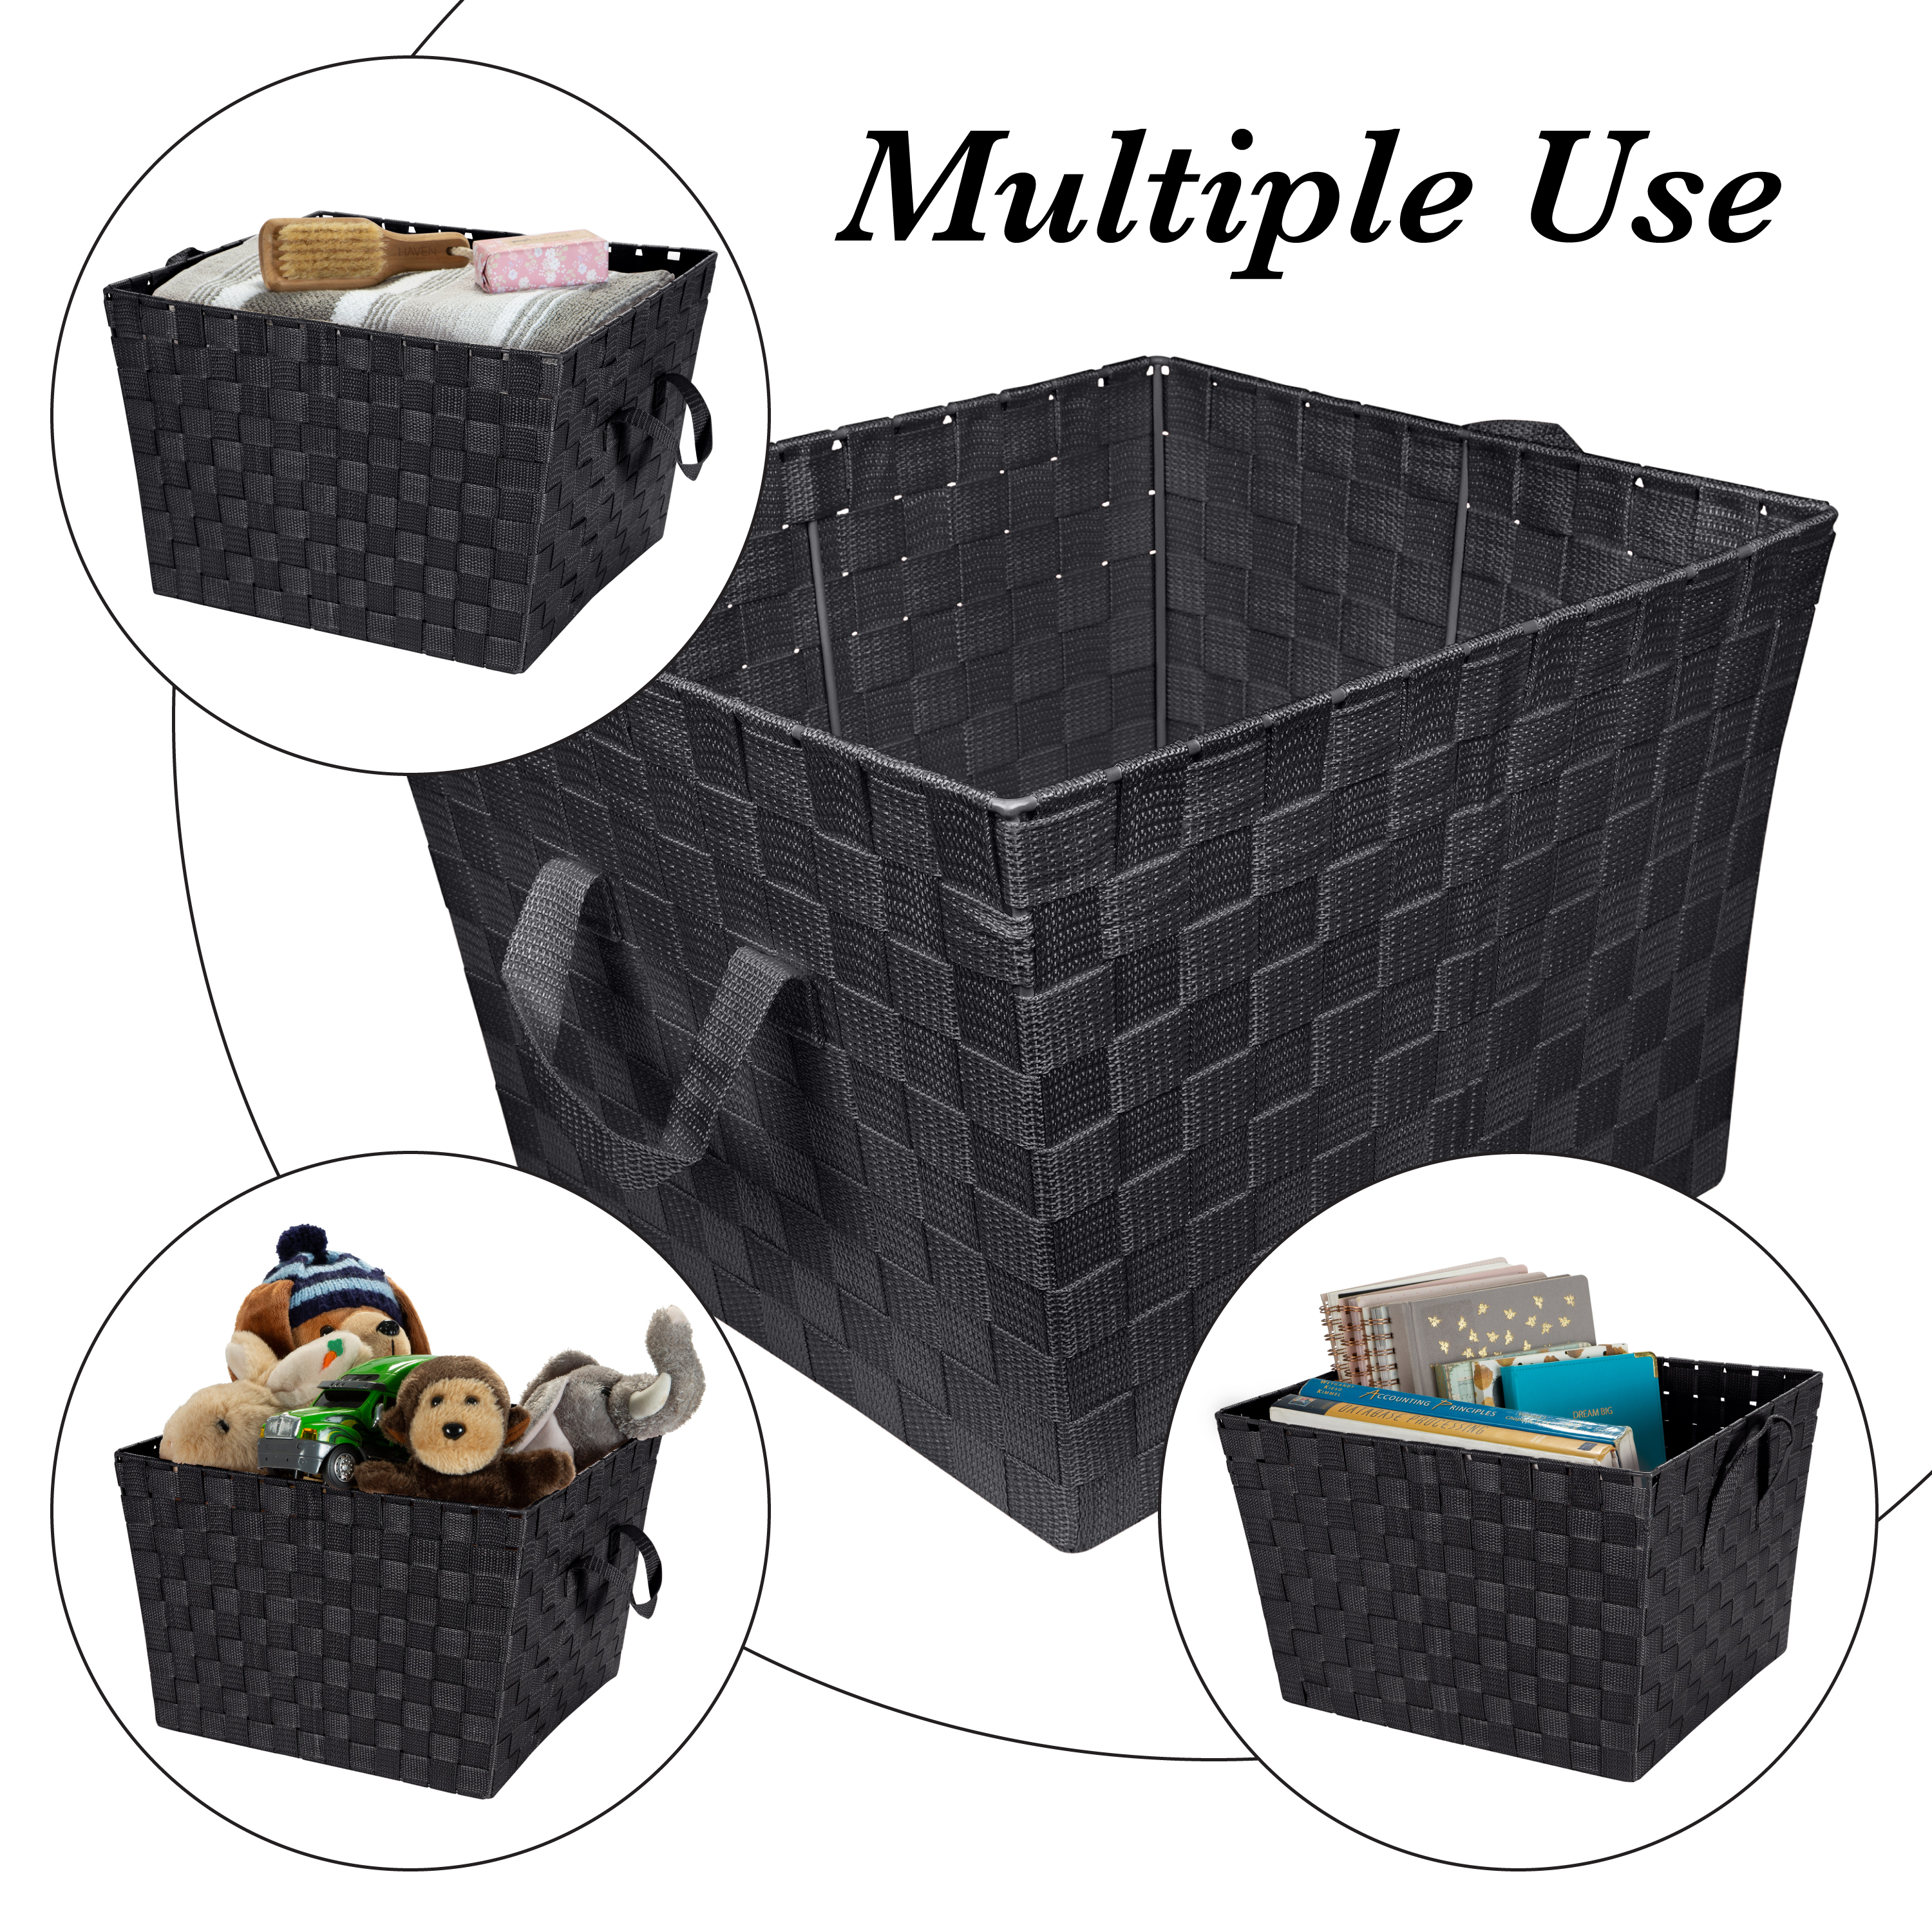 Simplify Large Woven Fabric Storage Basket in Black - image 4 of 8